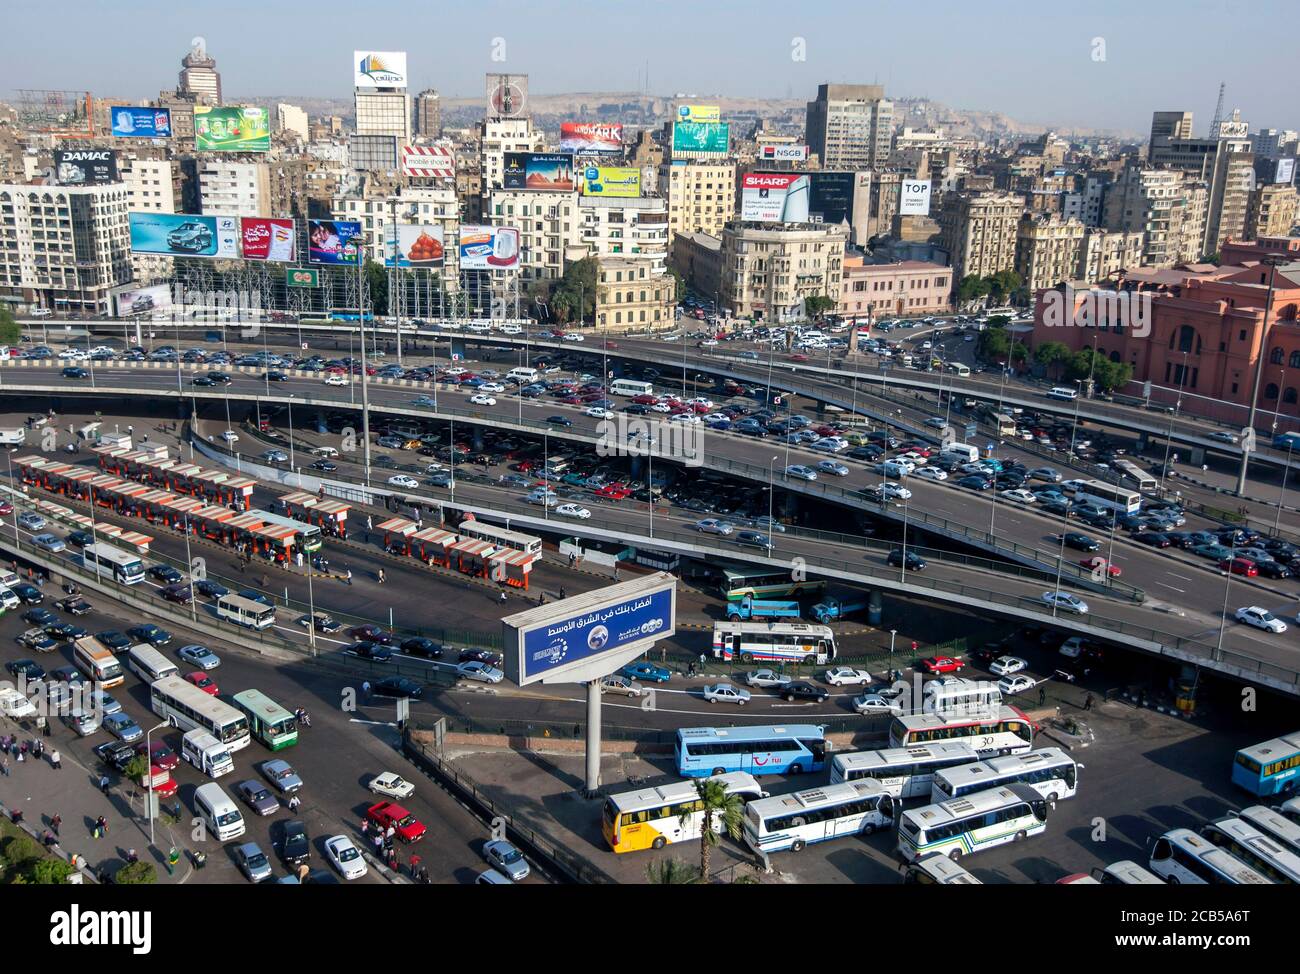 Traffic comes to a crawl on the roads of downtown Cairo in Egypt in the late afternoon. In the background are office buildings and apartments. Stock Photo